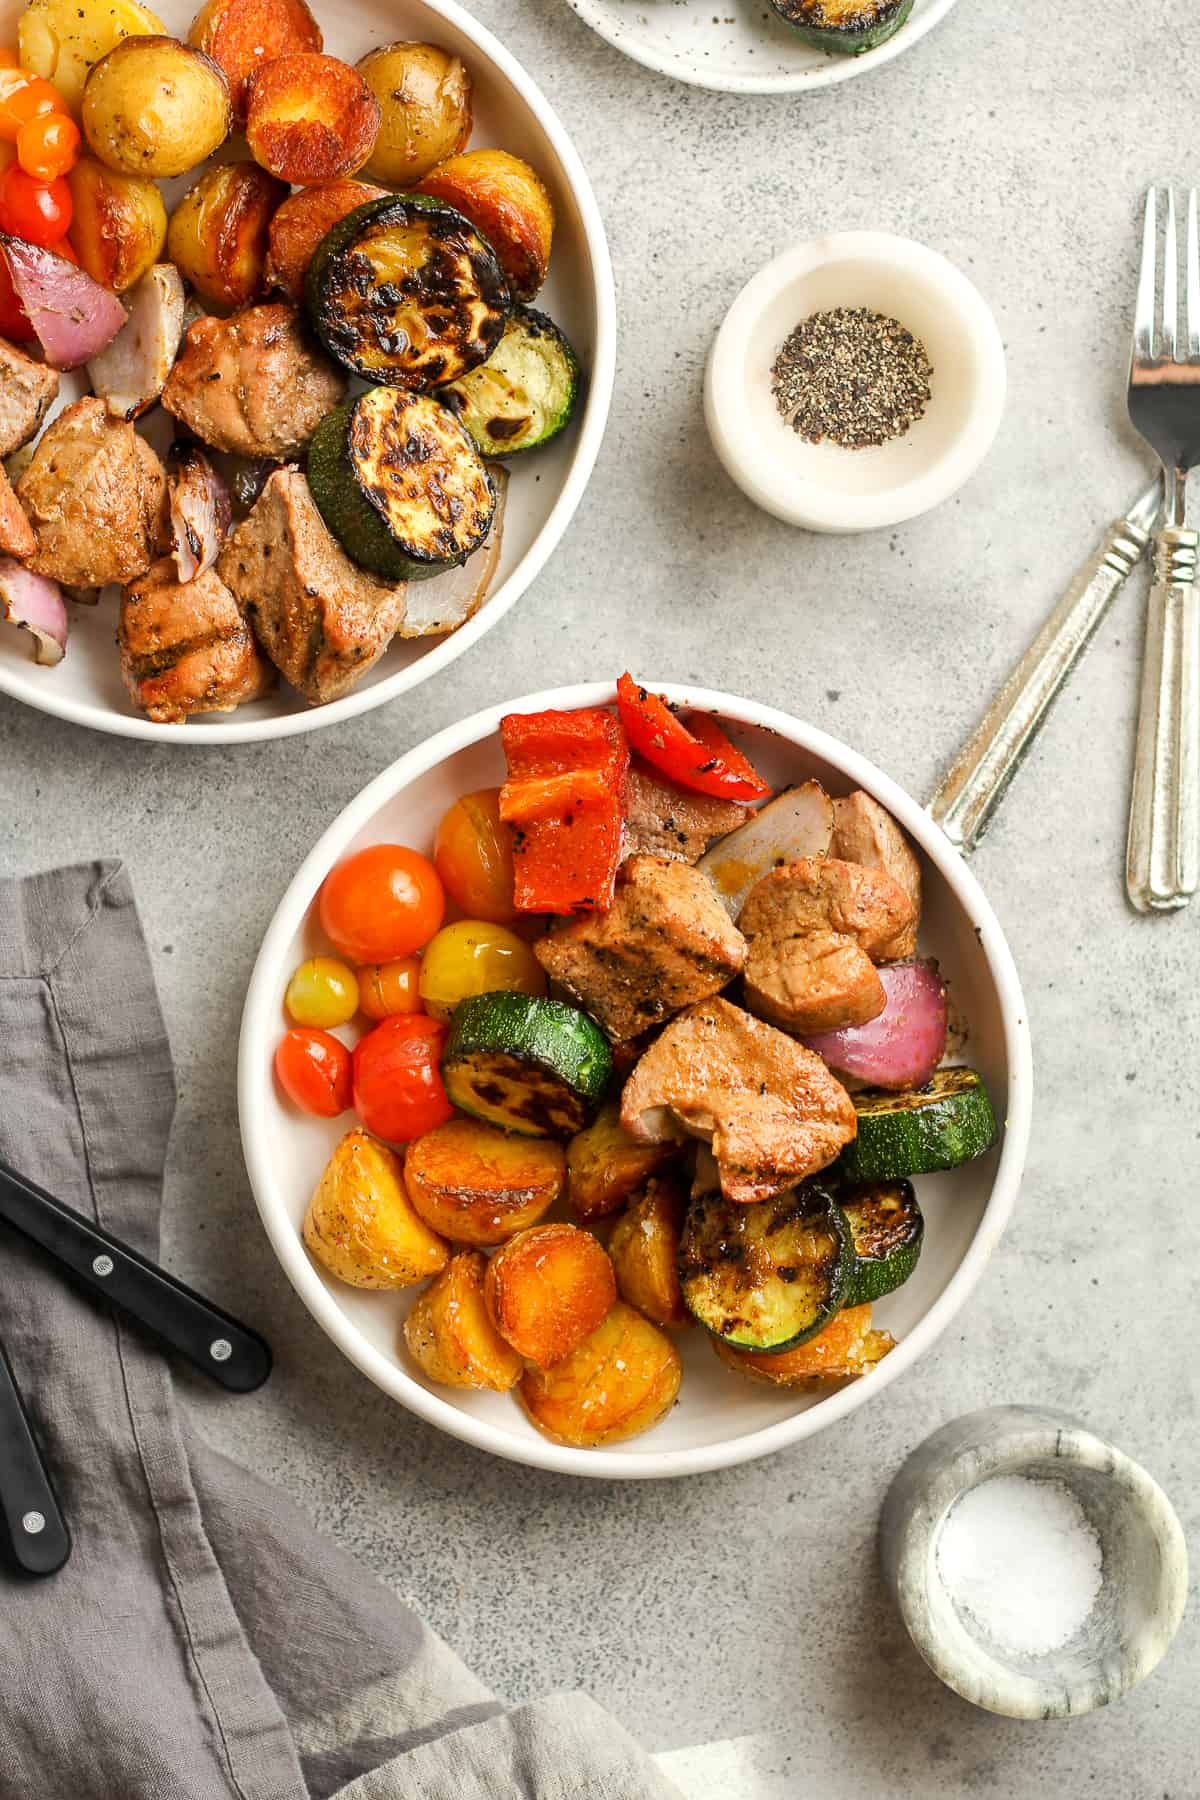 Overhead shot of two bowls of the pork kabobs and veggies on a gray background.